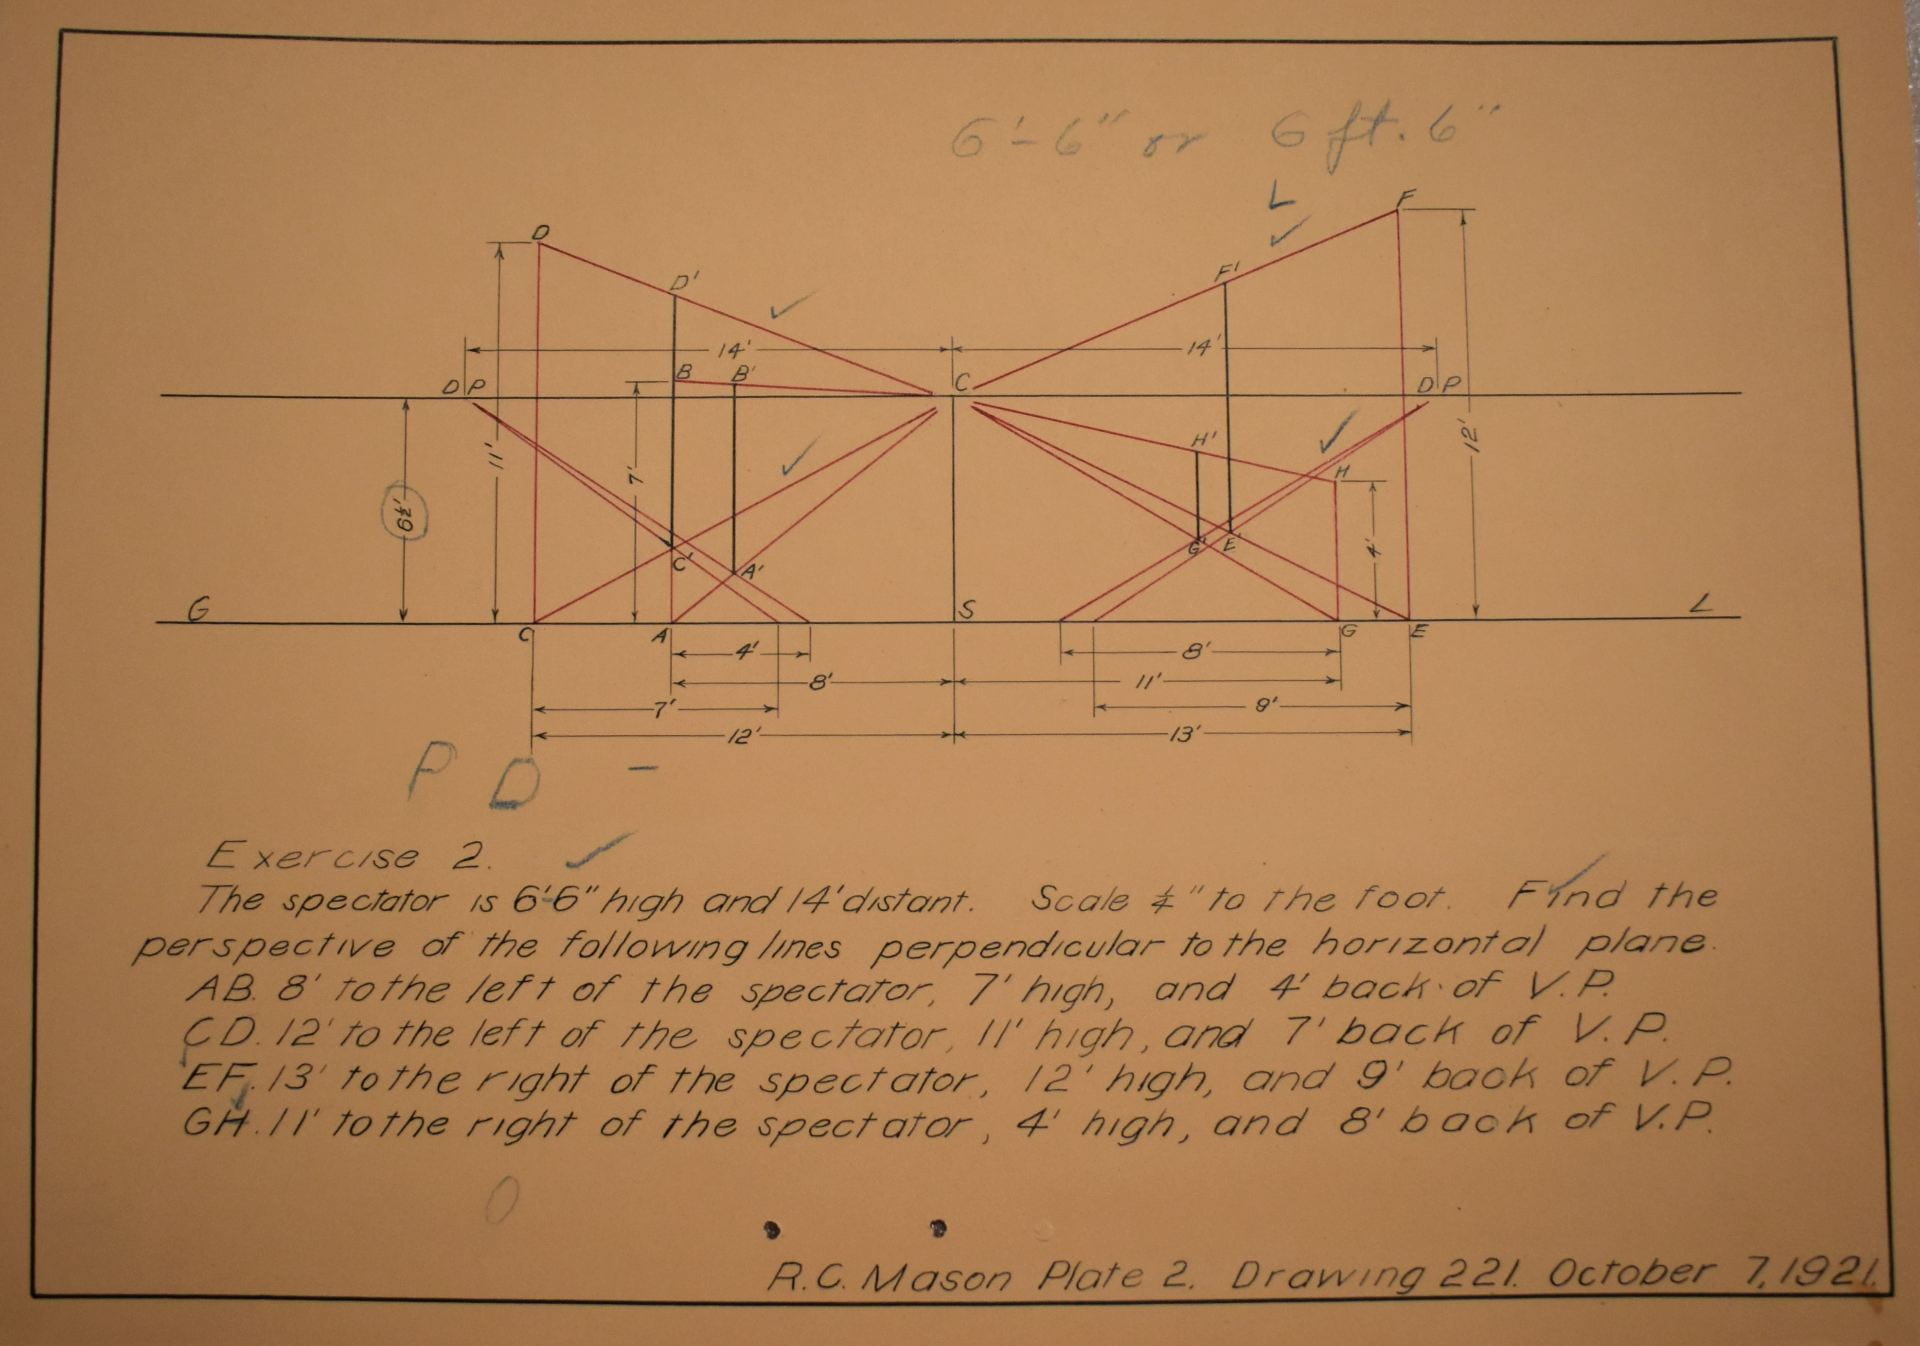 A yellowed document featuring a student assignment. There is an architectural sketch of some sort of building or structure. Underneath is an in-depth description of measurements for the drawing. In bottom right corner are the words 